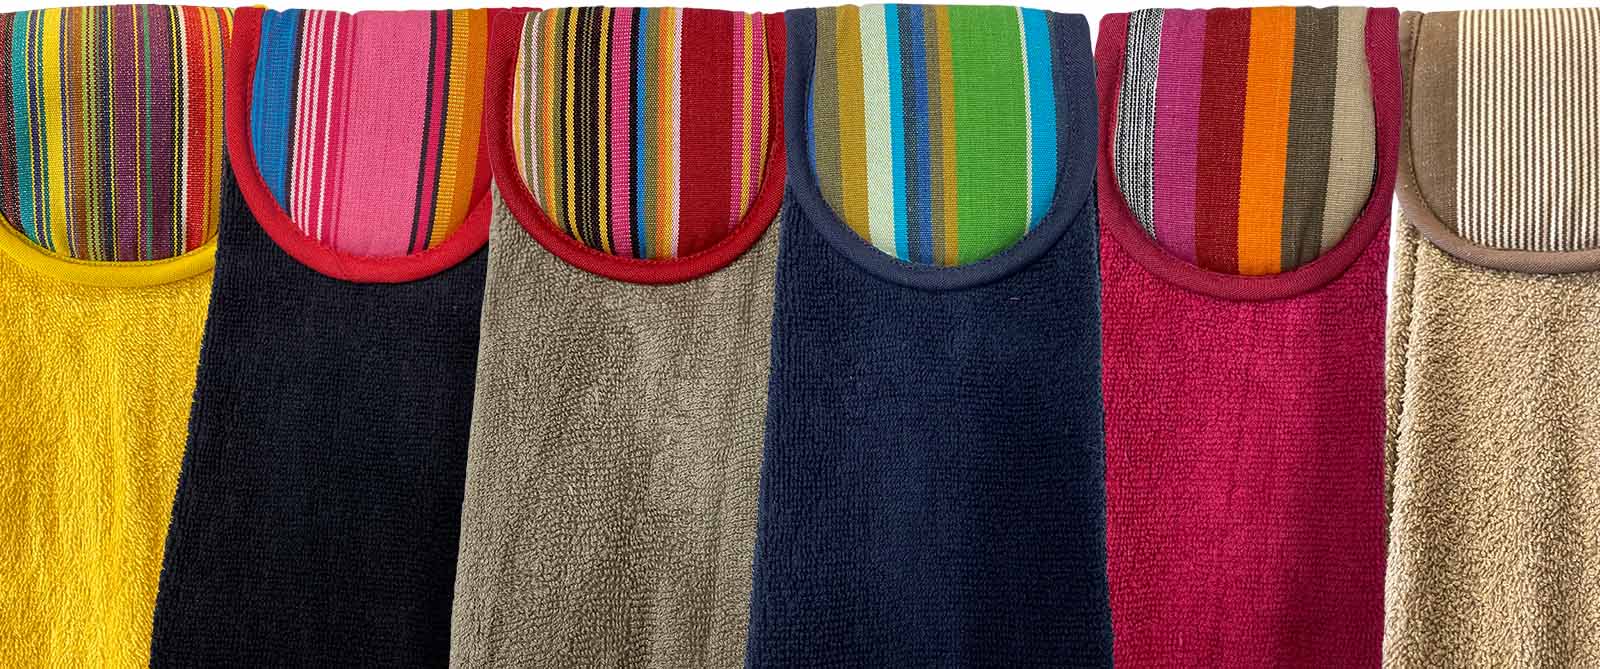 Aga Towels | Hanging Hand Towels for Ranges